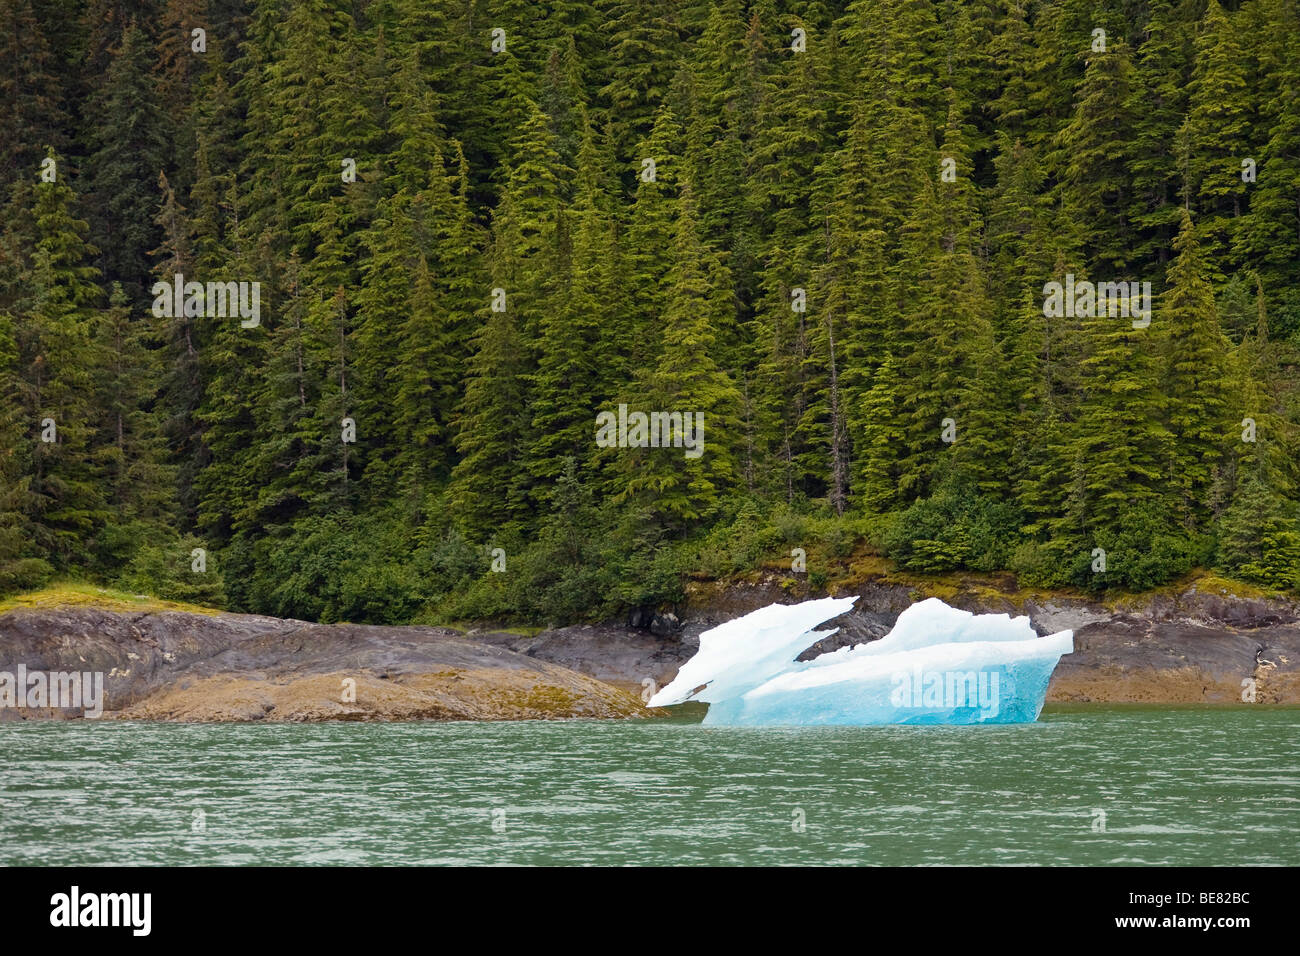 Icefloe in front of coastline with forest, Inside Passage, Southeast Alaska, USA Stock Photo